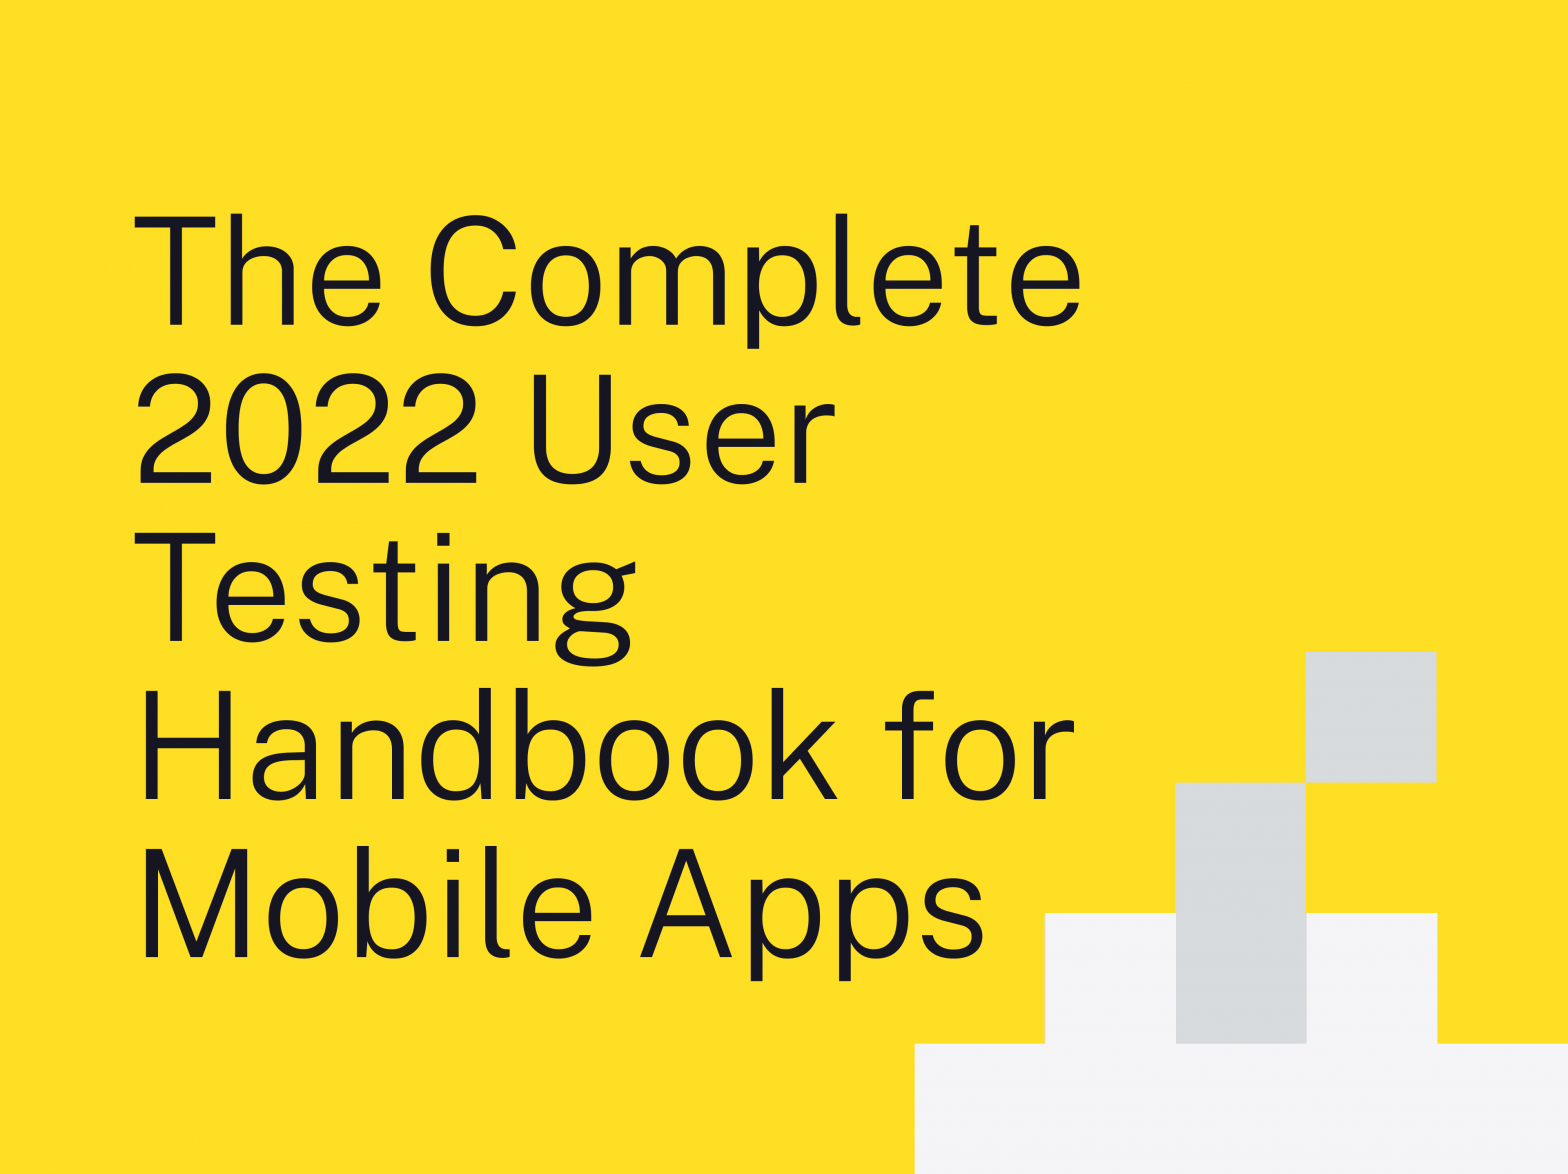 The Complete 2022 User Testing Handbook for Mobile Apps